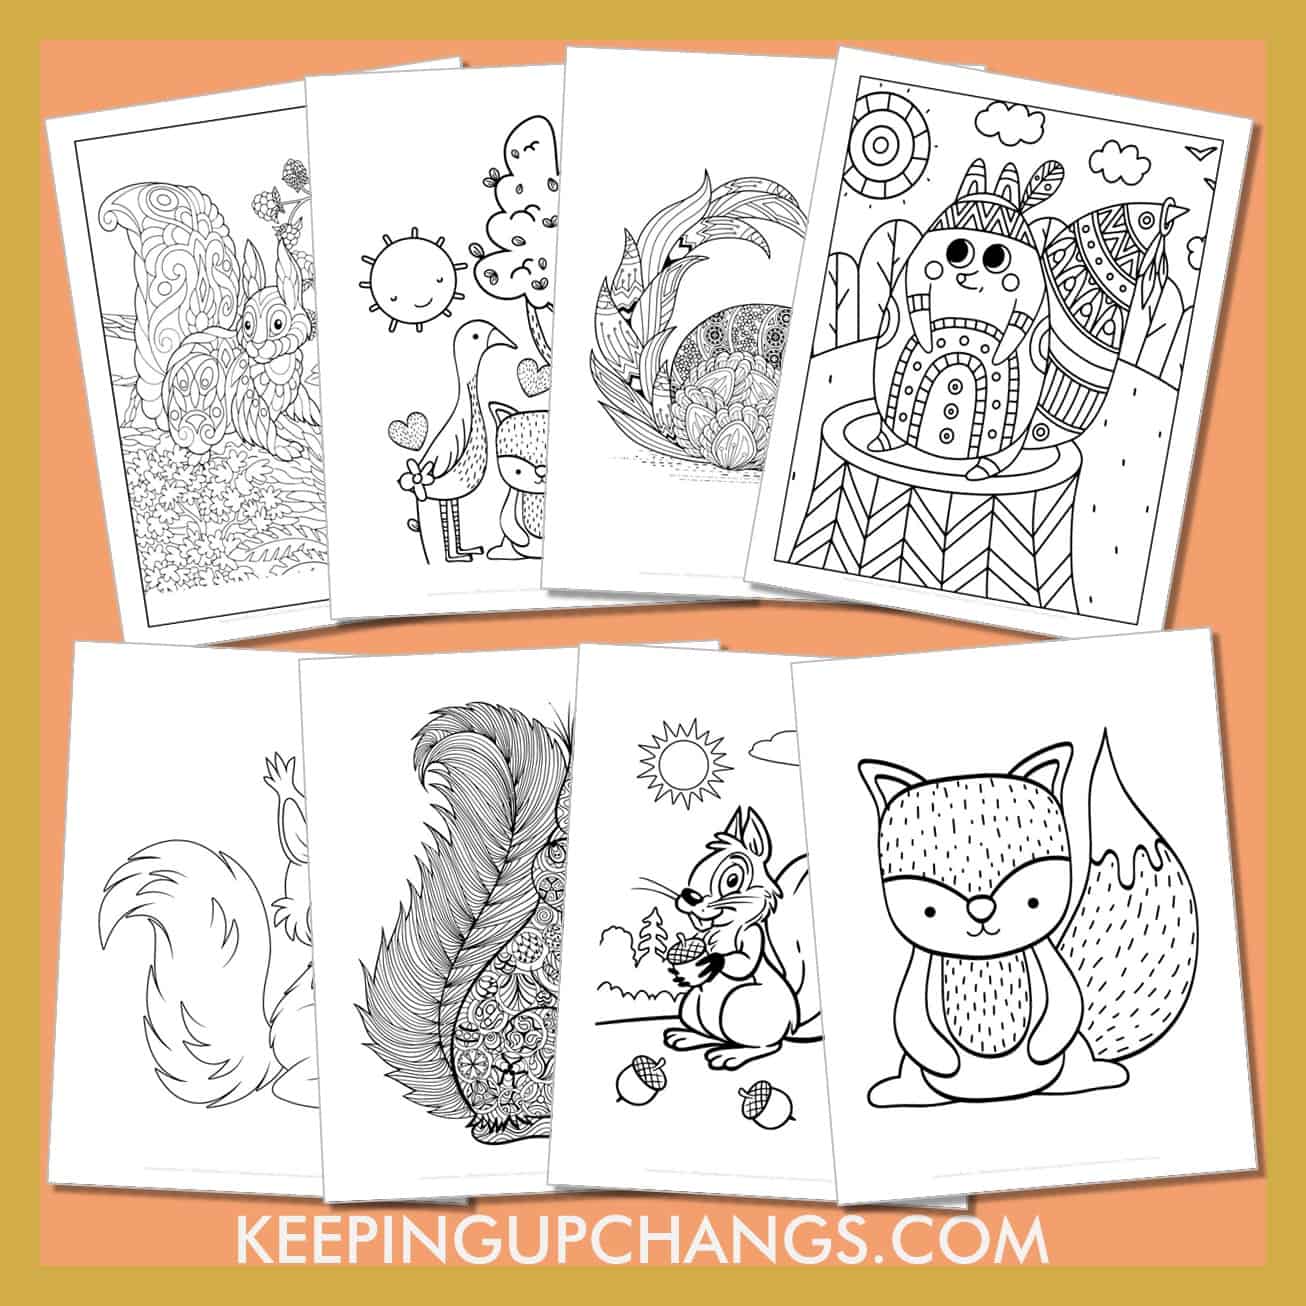 free squirrel pictures to color for toddlers, kids, adults.